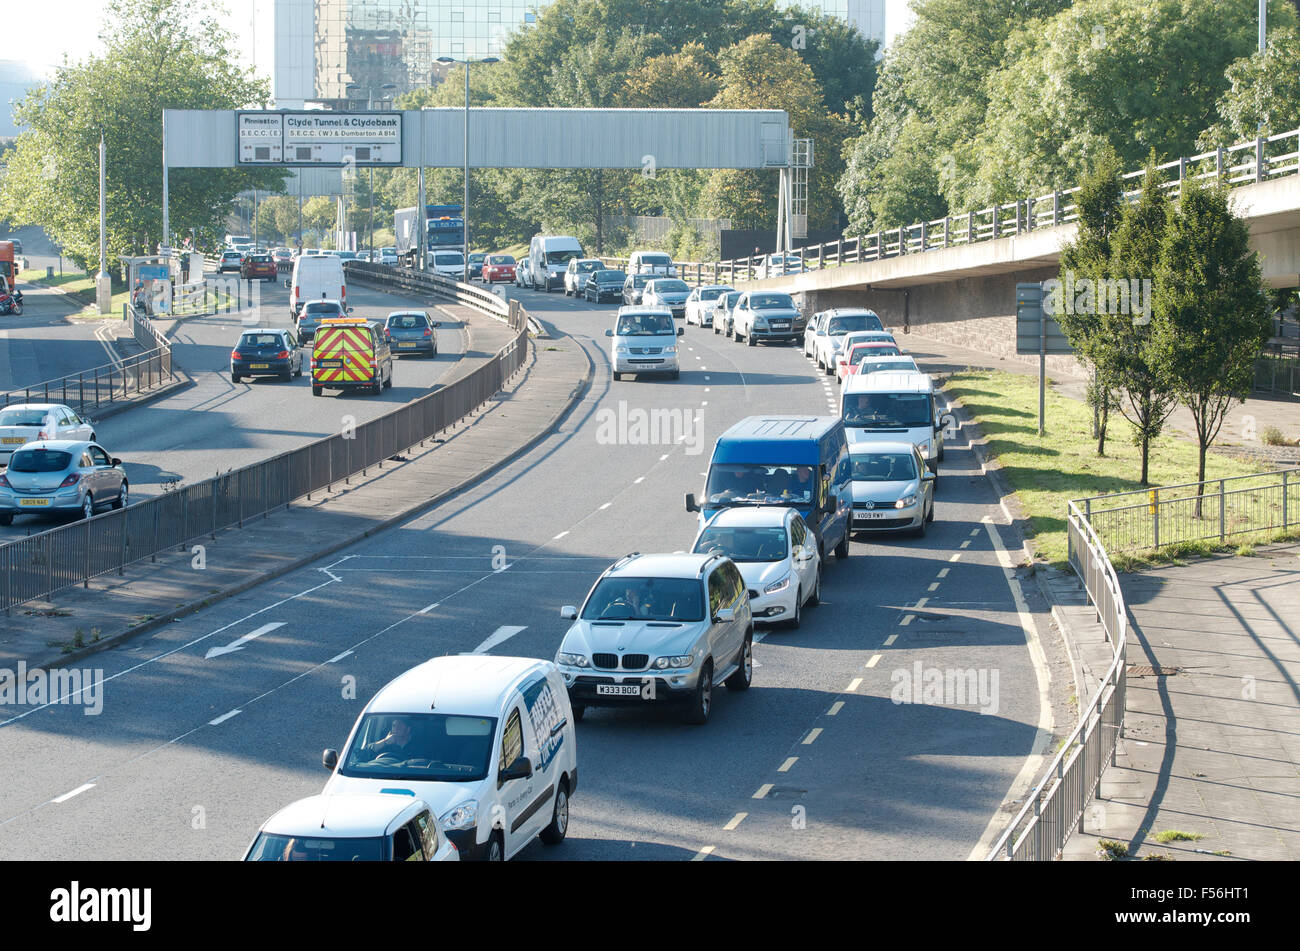 Traffic tailback builds up on the A814 exit to Charing Cross and the M8, Glasgow Stock Photo